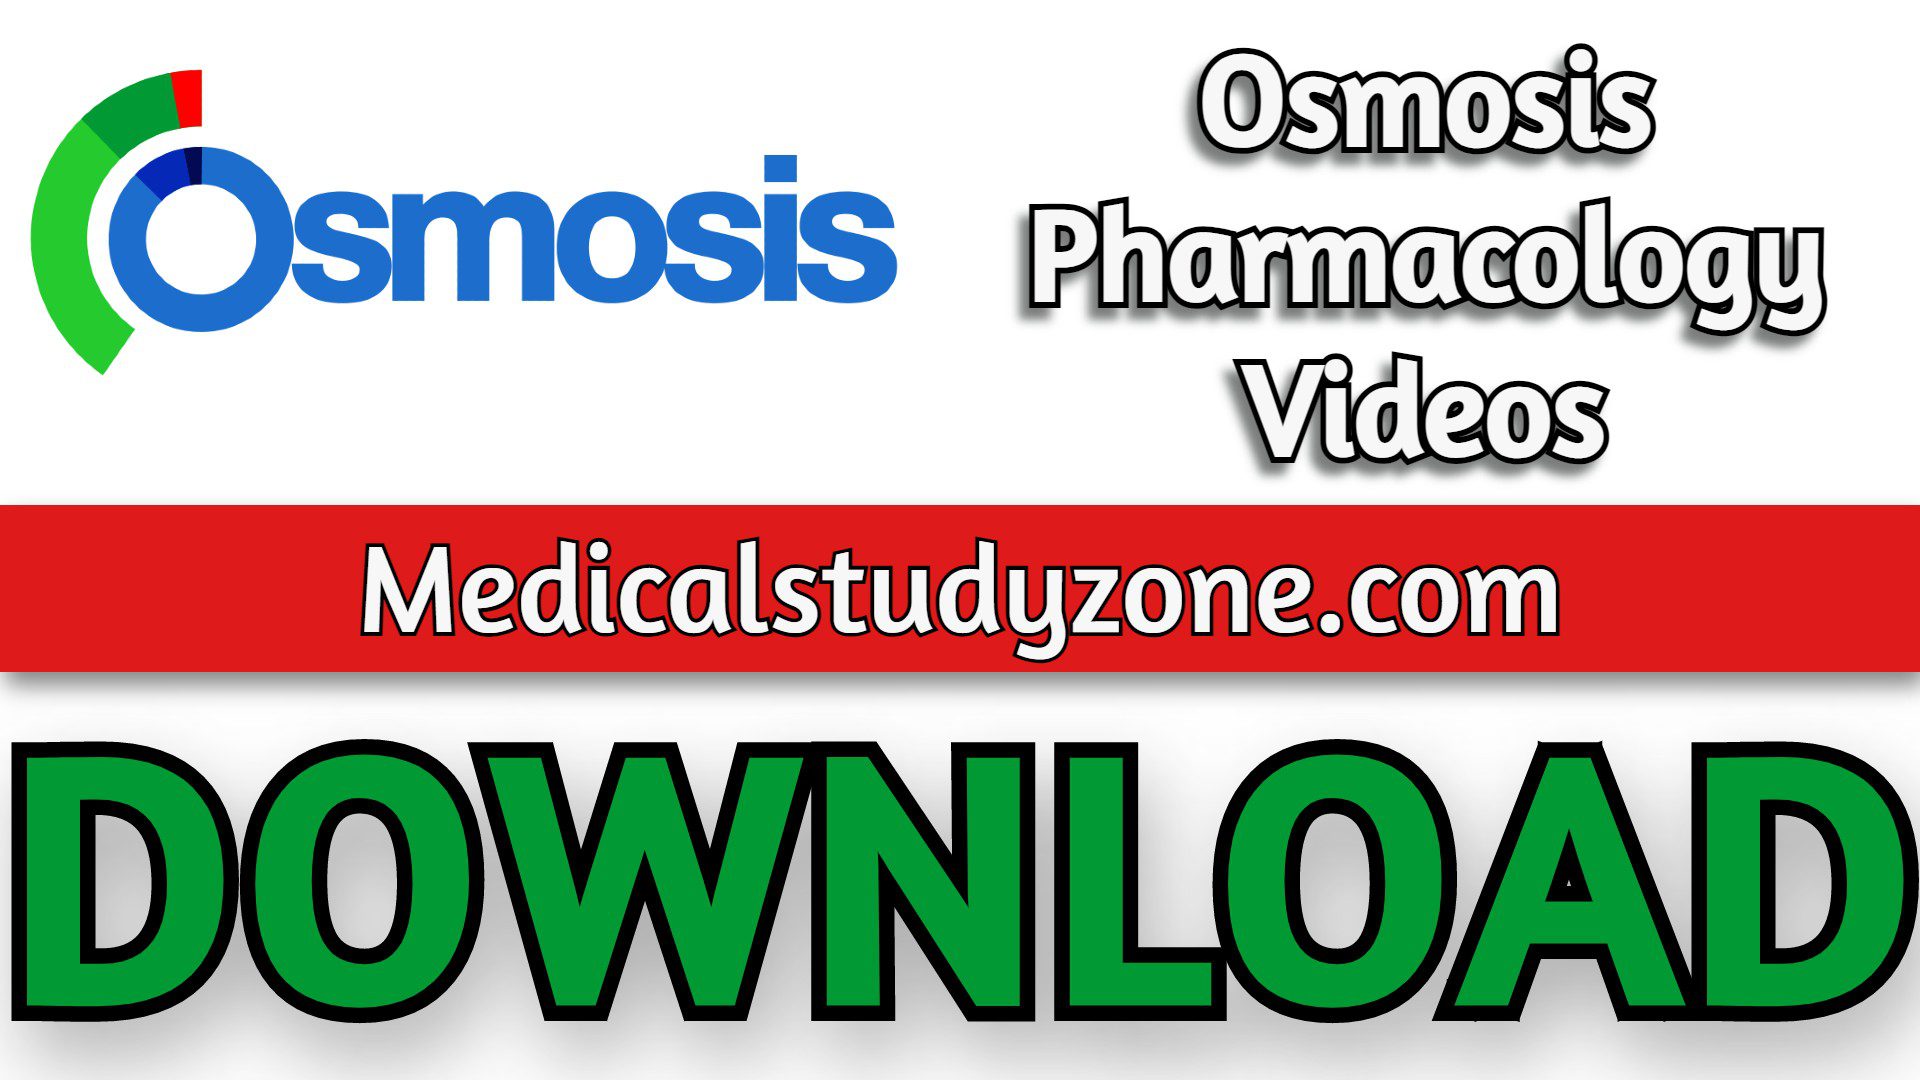 Osmosis Pharmacology Videos 2021 Free Download